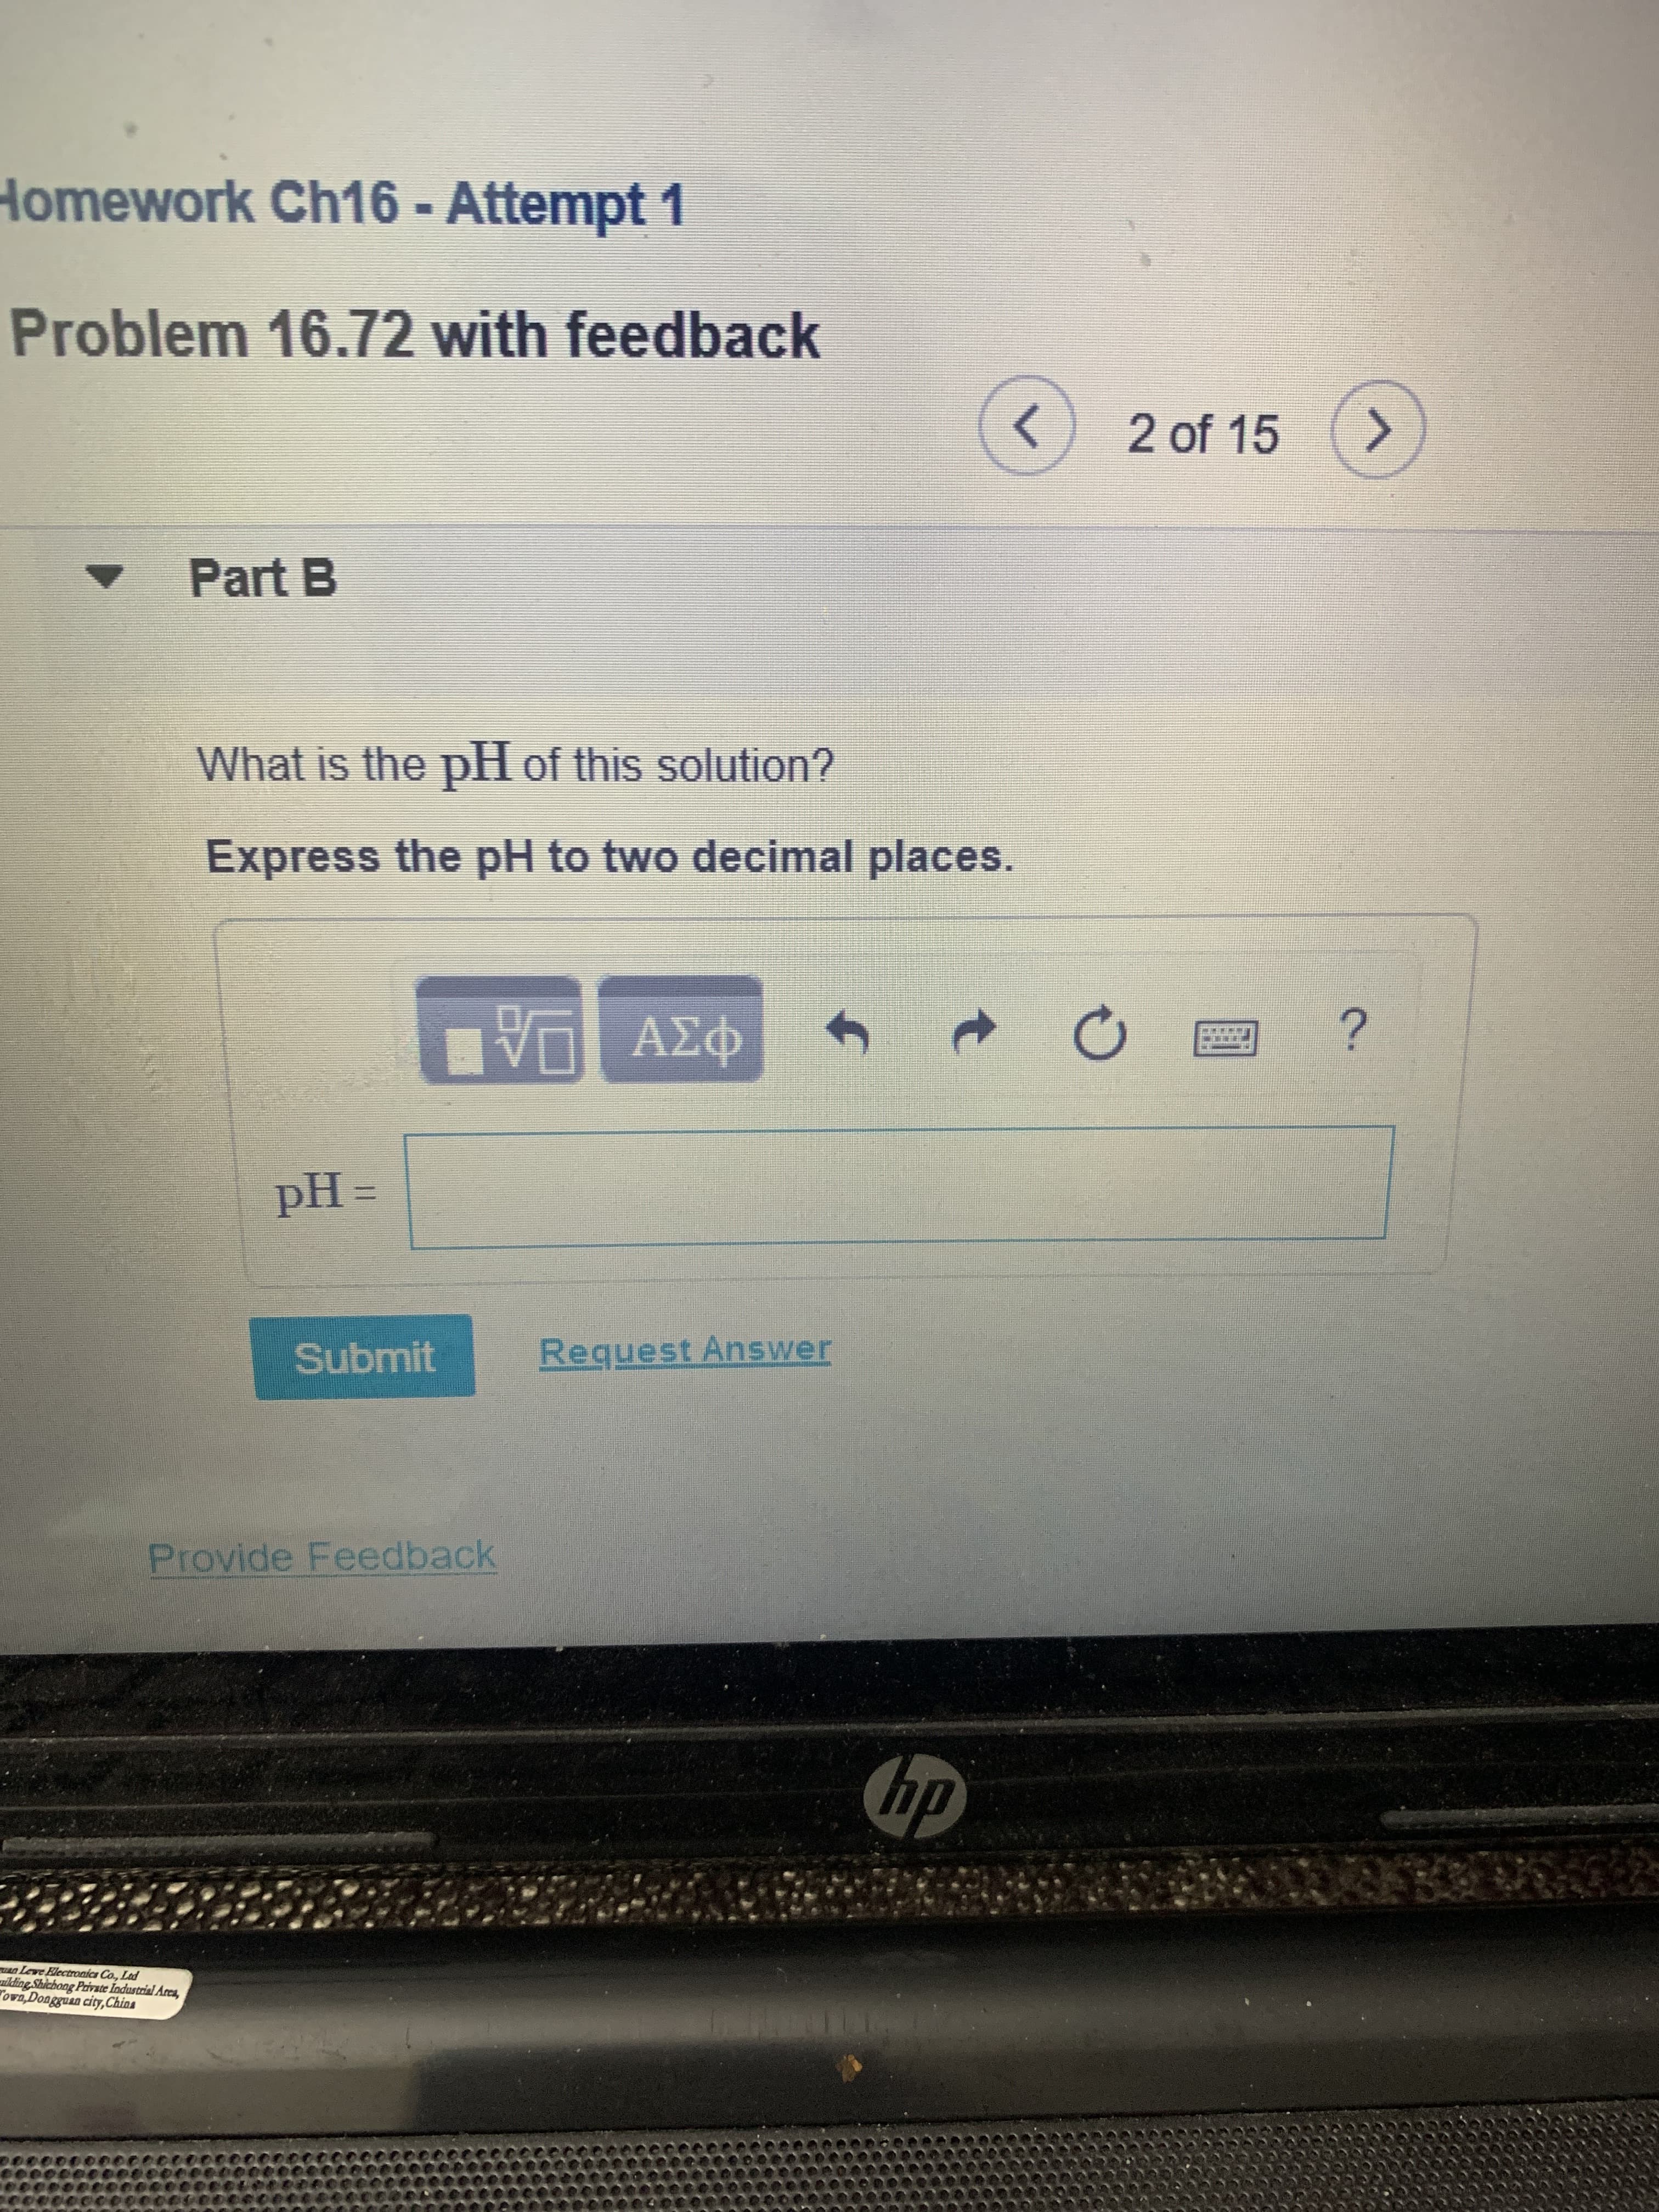 Homework Ch16 - Attempt 1
Problem 16.72 with feedback
<>
2 of 15
Part B
What is the pH of this solution?
Express the pH to two decimal places.
Submit
Request Answer
Provide Feedback
hp
an Lewe Electronics Co., Ltd
lding Shicbong Privrate Industrial Acca,
ova,Dongguan city,China
